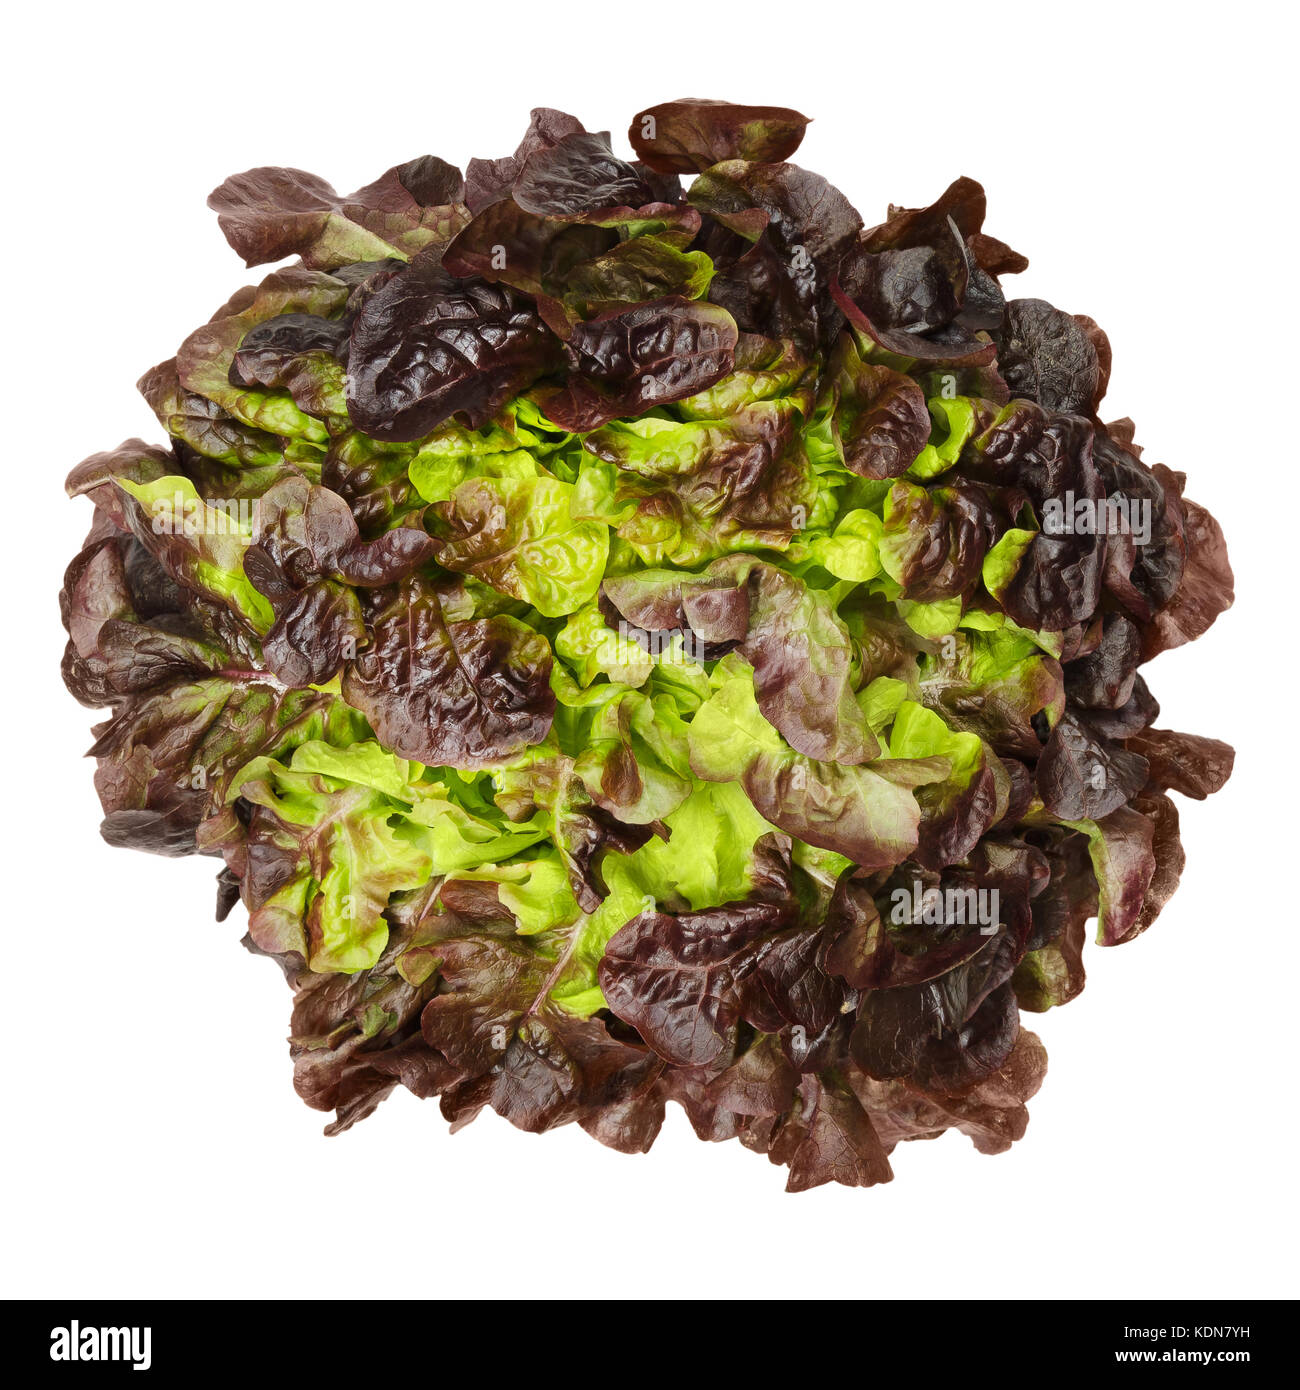 Red oak leaf lettuce from above isolated over white. Also called oakleaf, a variety of Lactuca sativa. Red butter lettuce with distinctly lobed leaves Stock Photo